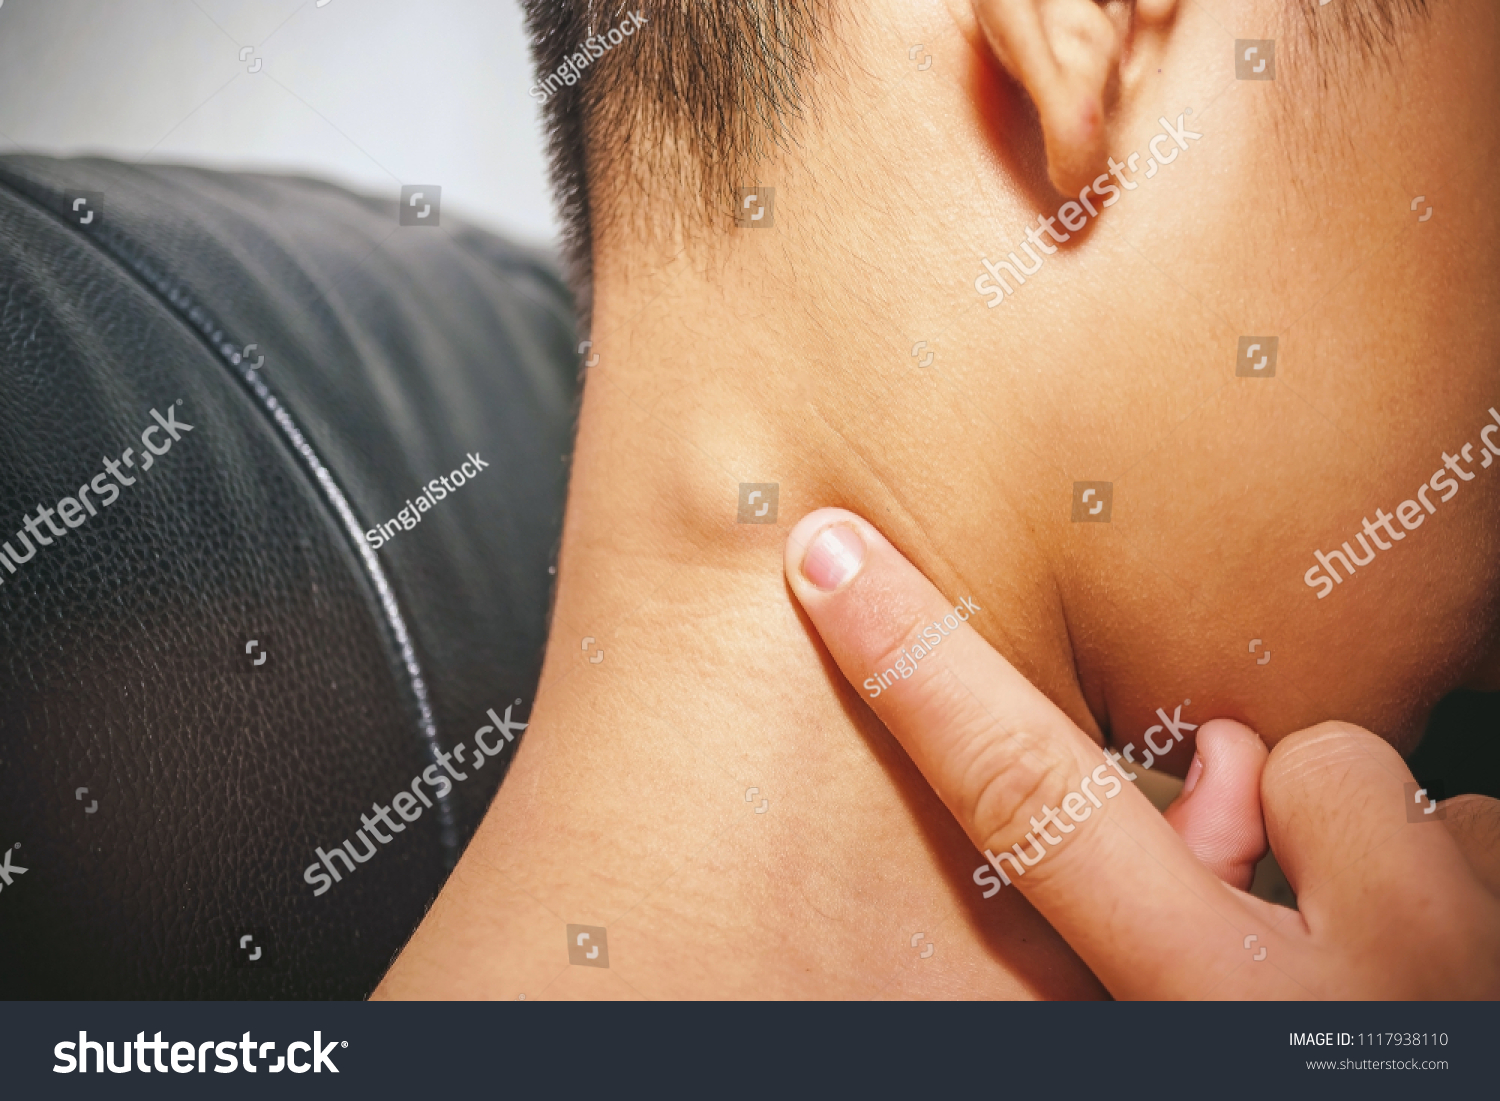 Lymph Node Swollen,  Closeup view of a young man with Sore throat or pain on the neck or thyroid gland he has inflammation lymph nodes in the neck, People body problem concept. #1117938110